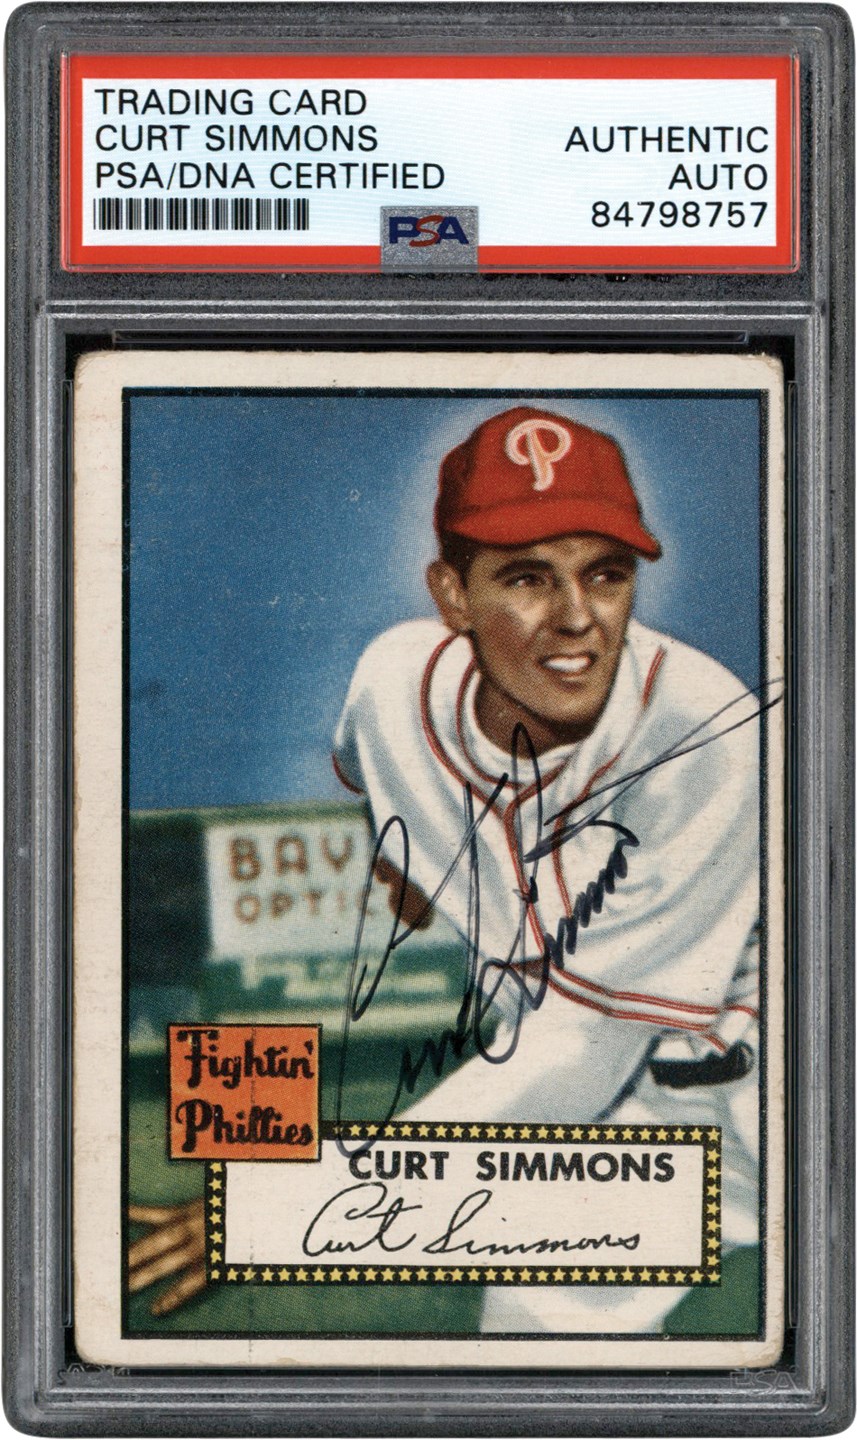 Signed 1952 Topps #203 Curt Simmons PSA Authentic Auto